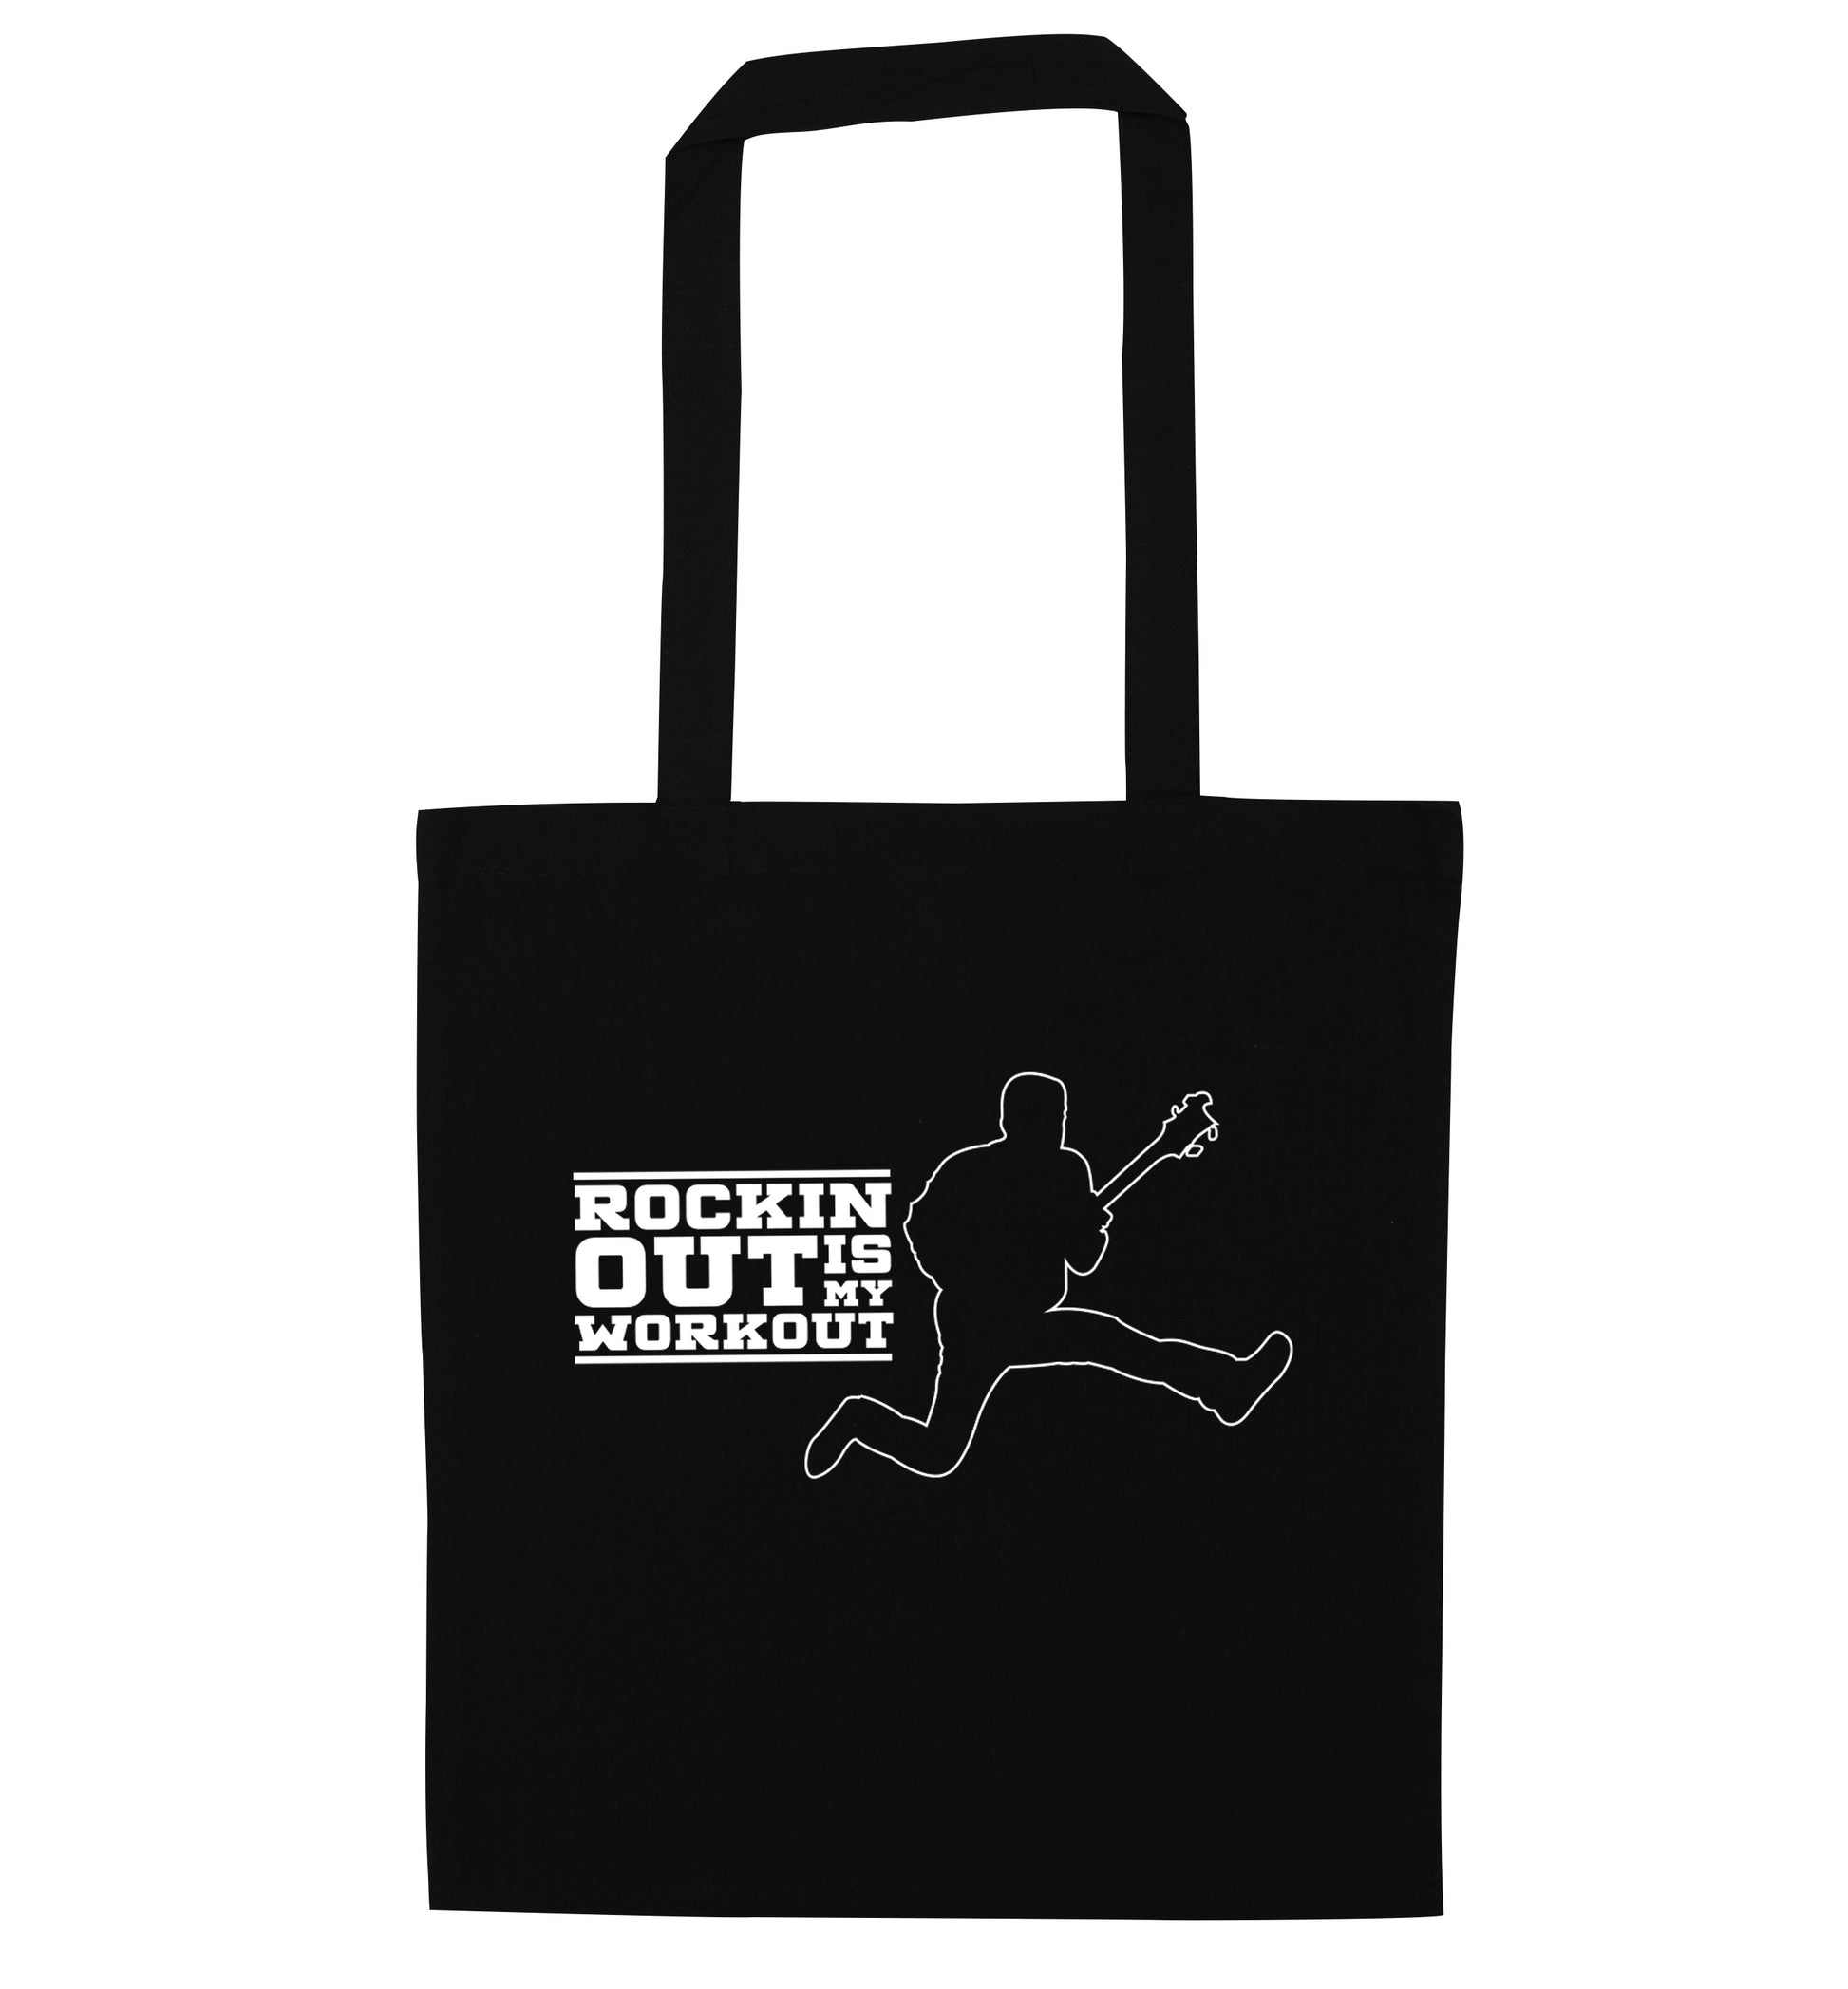 Rockin out is my workout black tote bag